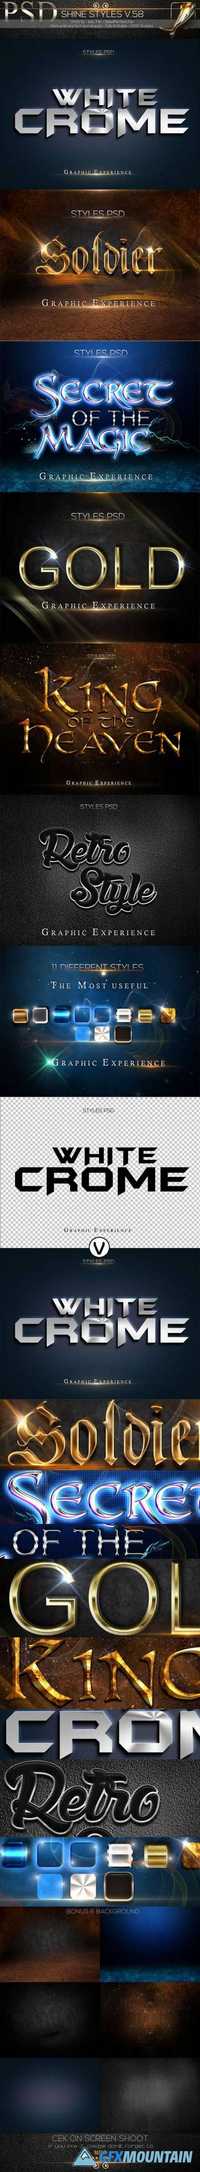 Graphicriver Text Style V.58 12249967